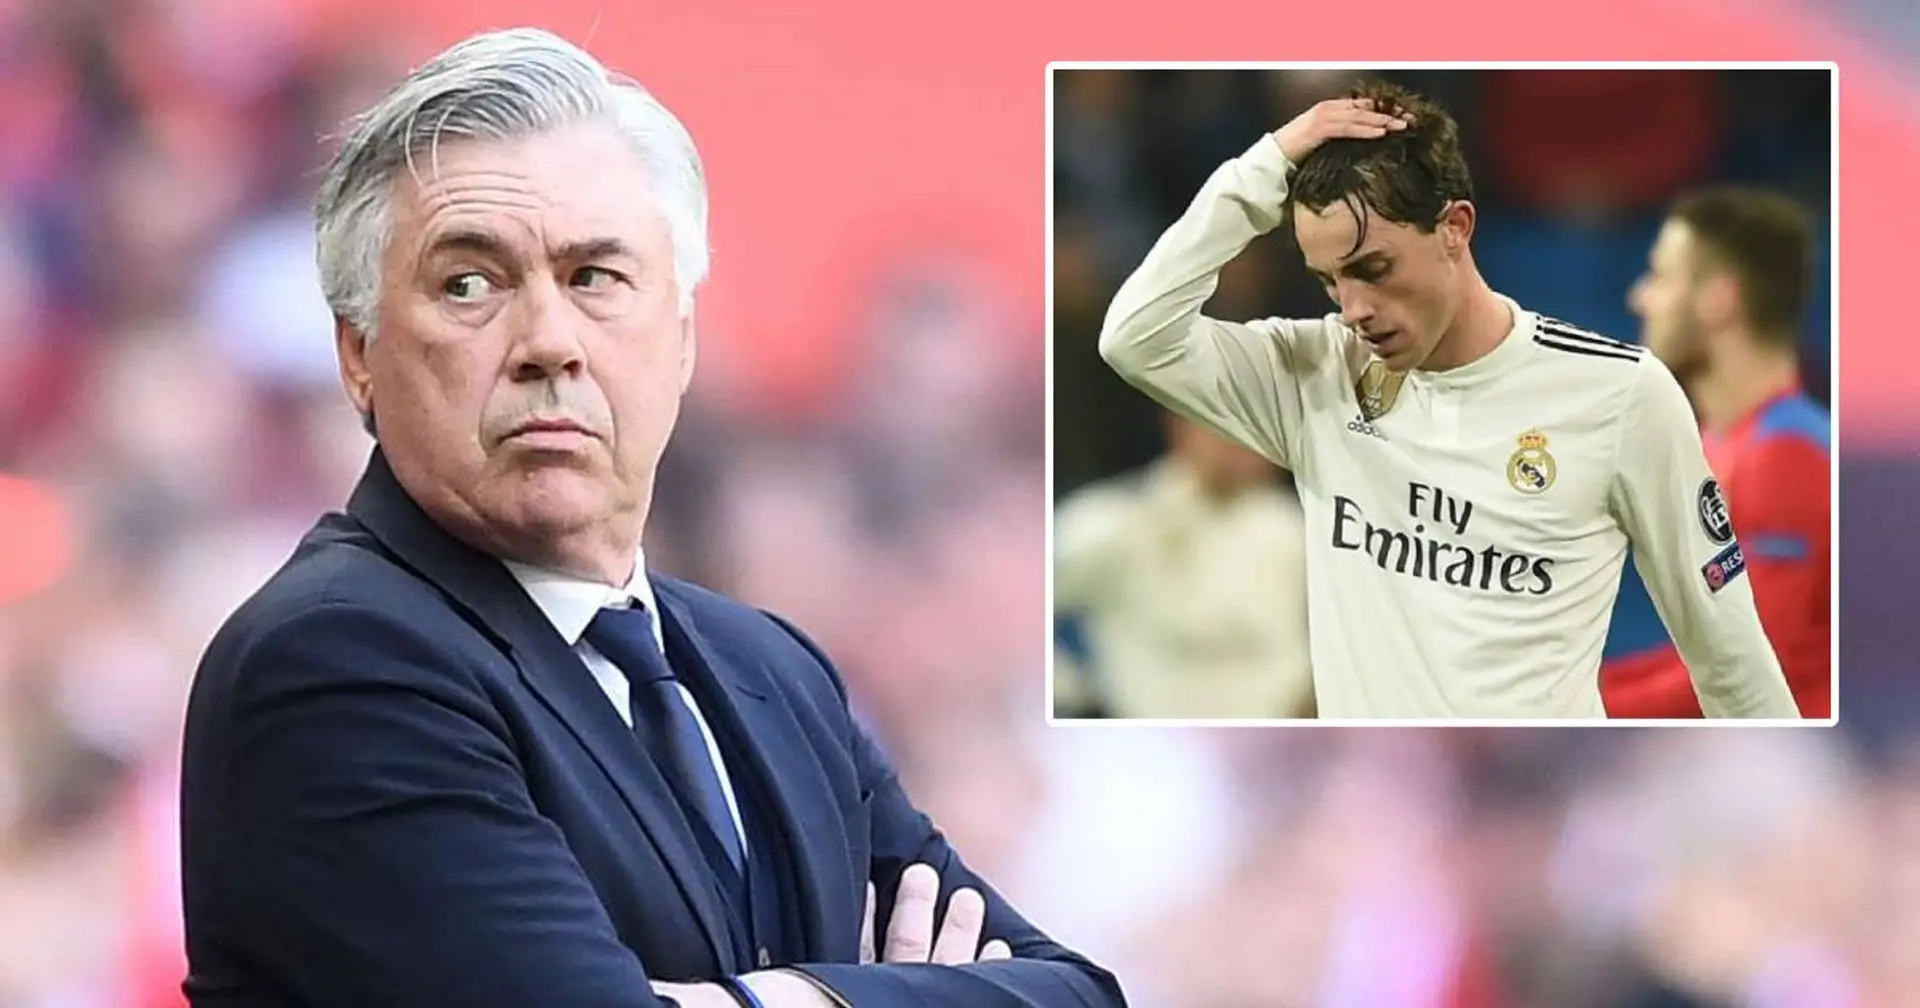 Odriozola not in Ancelotti's plans, likely to leave Real Madrid this summer (reliability: 5 stars)